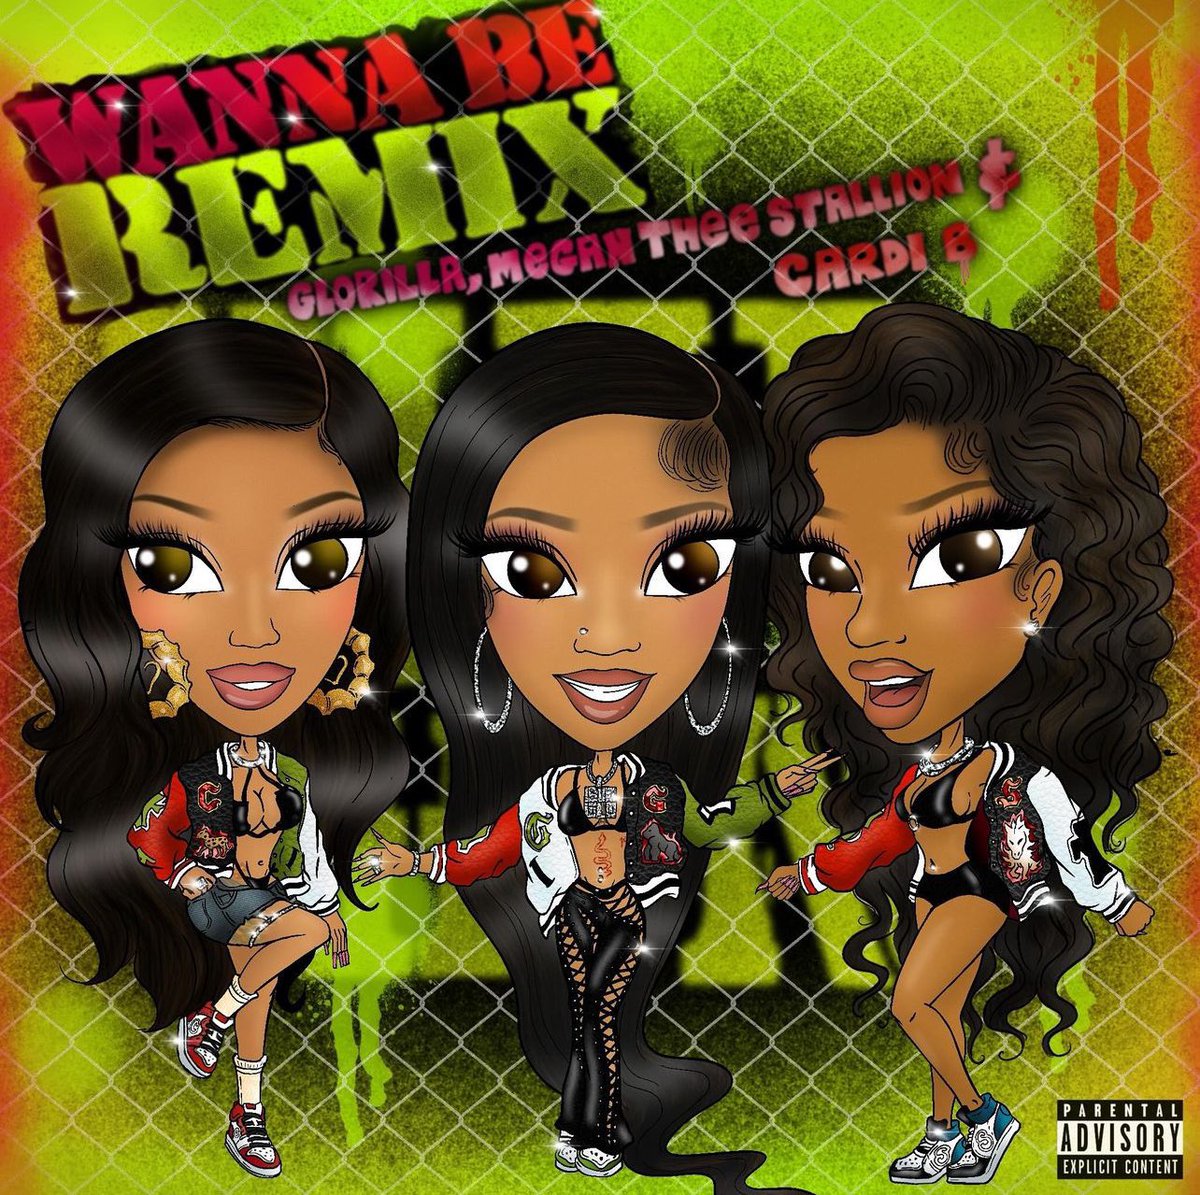 GloRilla, Megan Thee Stallion and @iamcardib's 'Wanna Be' remix will be released this Friday, May 31.